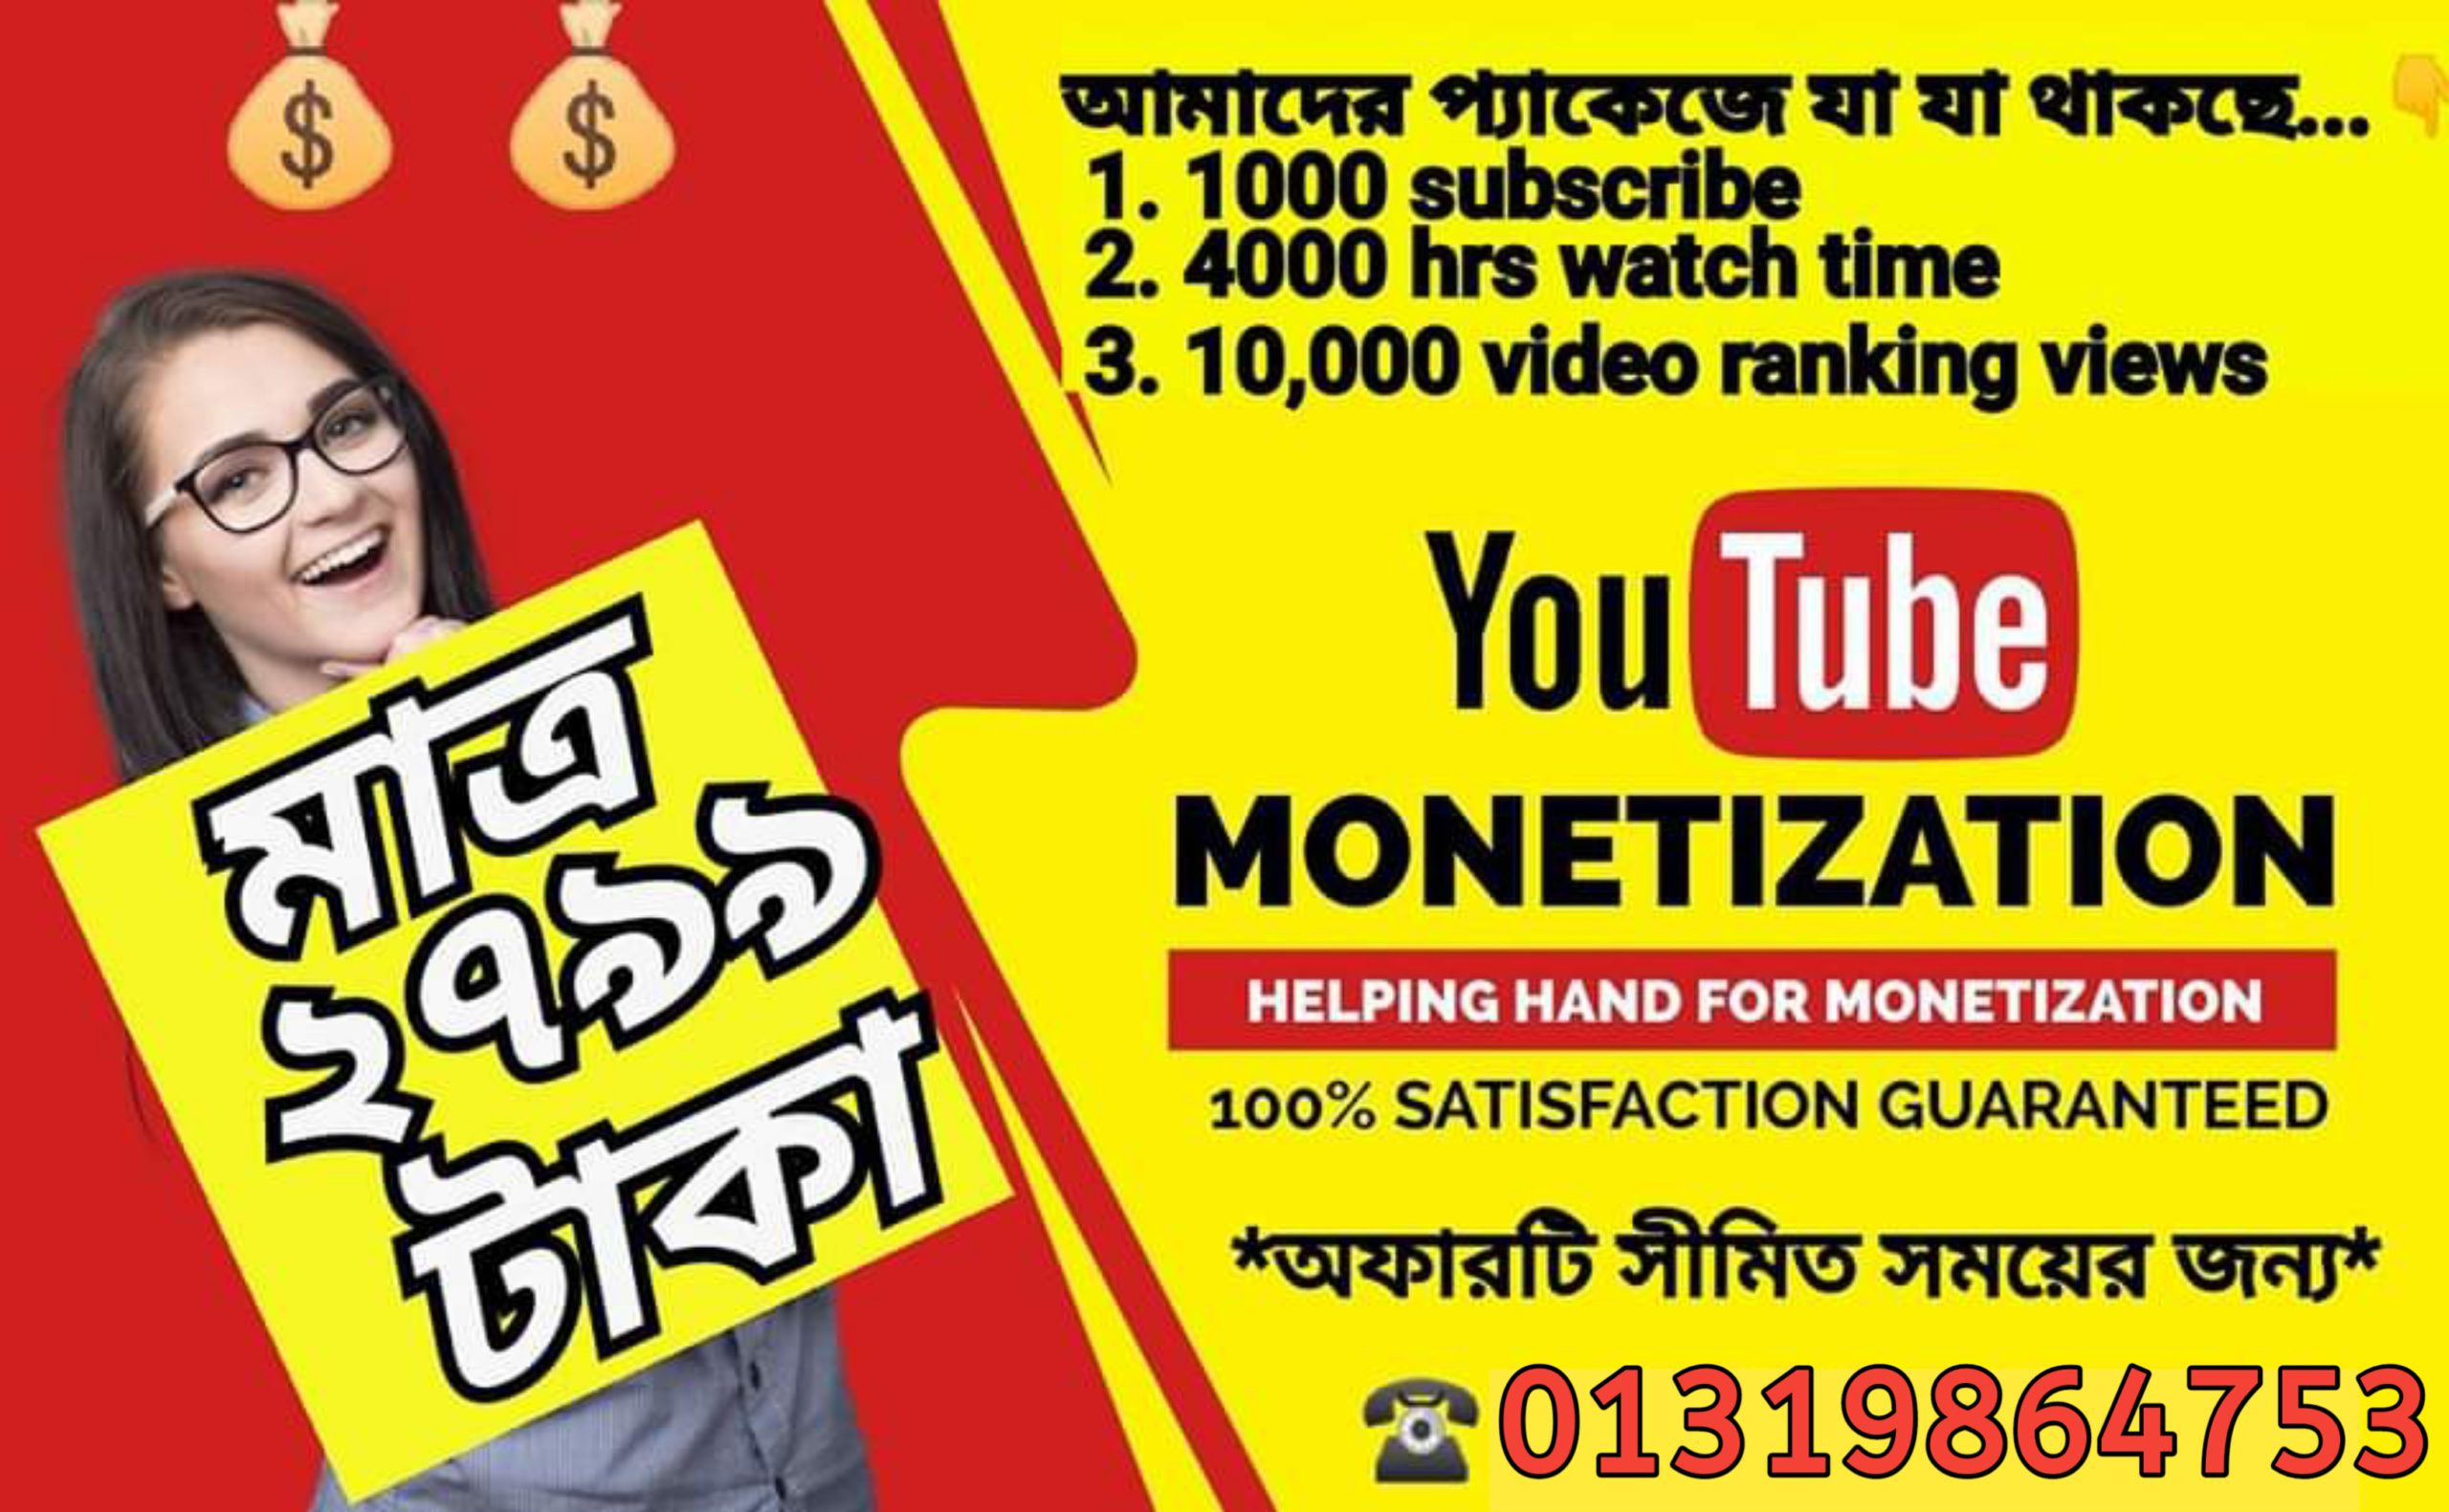 151533Monitize YouTube channel sell